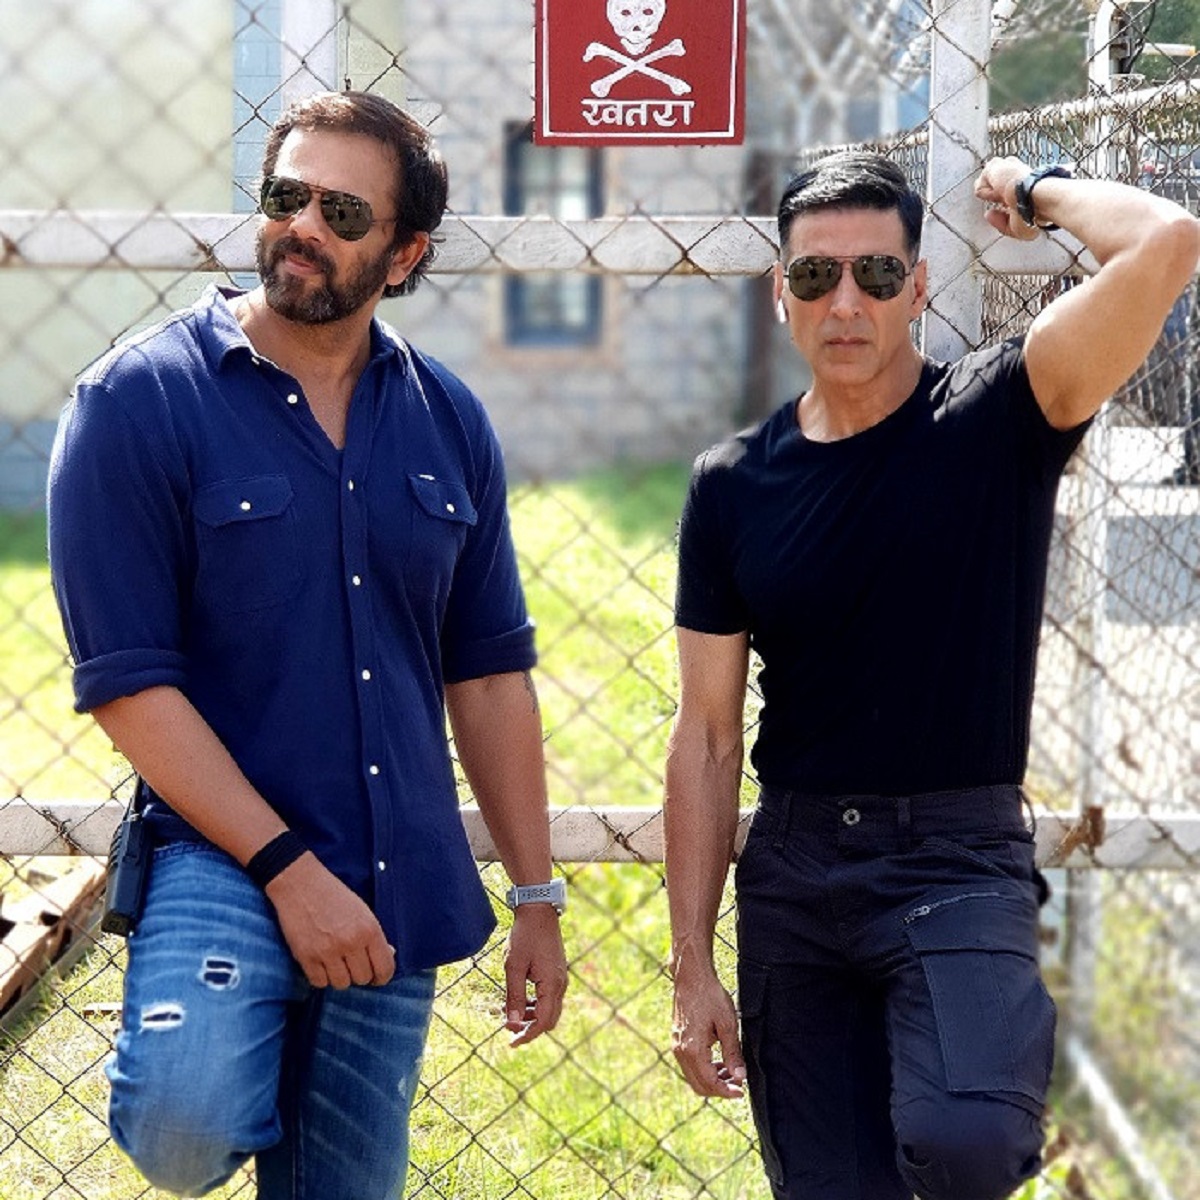 Box Office Collections: Sooryavanshi set to enter the 100 crore club; 15th for Akshay Kumar, 8th for Rohit Shetty